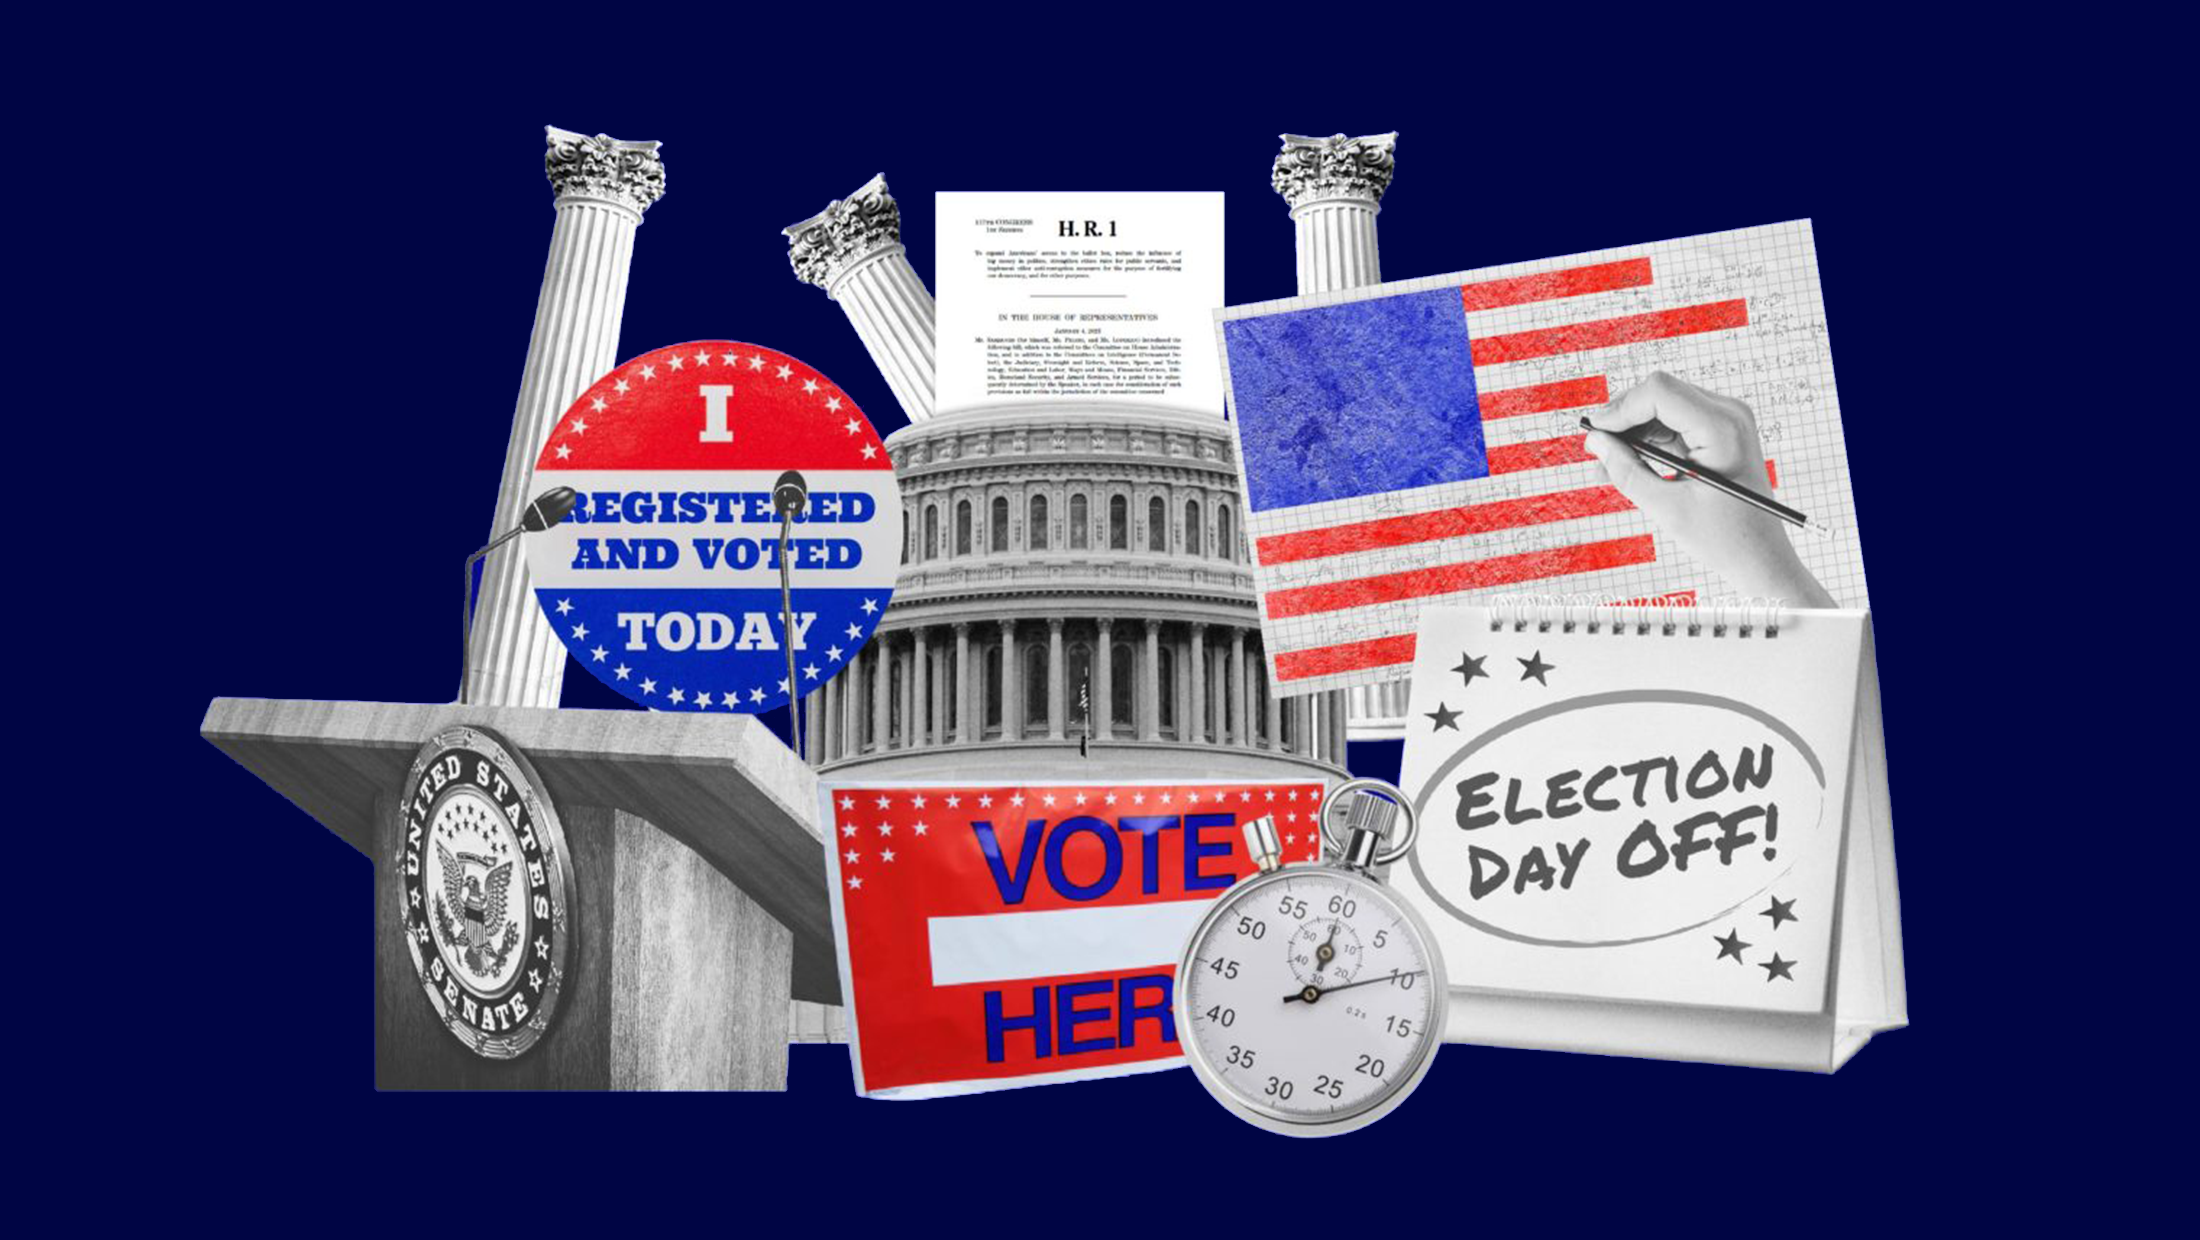 A collage of voting reform-related images including court pillars, a U.S. Senate podium, a voting sticker that says "I REGISTERED AND VOTED TODAY", a stopwatch, a "VOTE HERE" sign, the first page of H.R. 1, the U.S. Capitol, a small spiral flip notebook with the words "ELECTION DAY OFF" circled, and a hand writing on a piece of graph paper displaying an American-flag-shaped bar graph